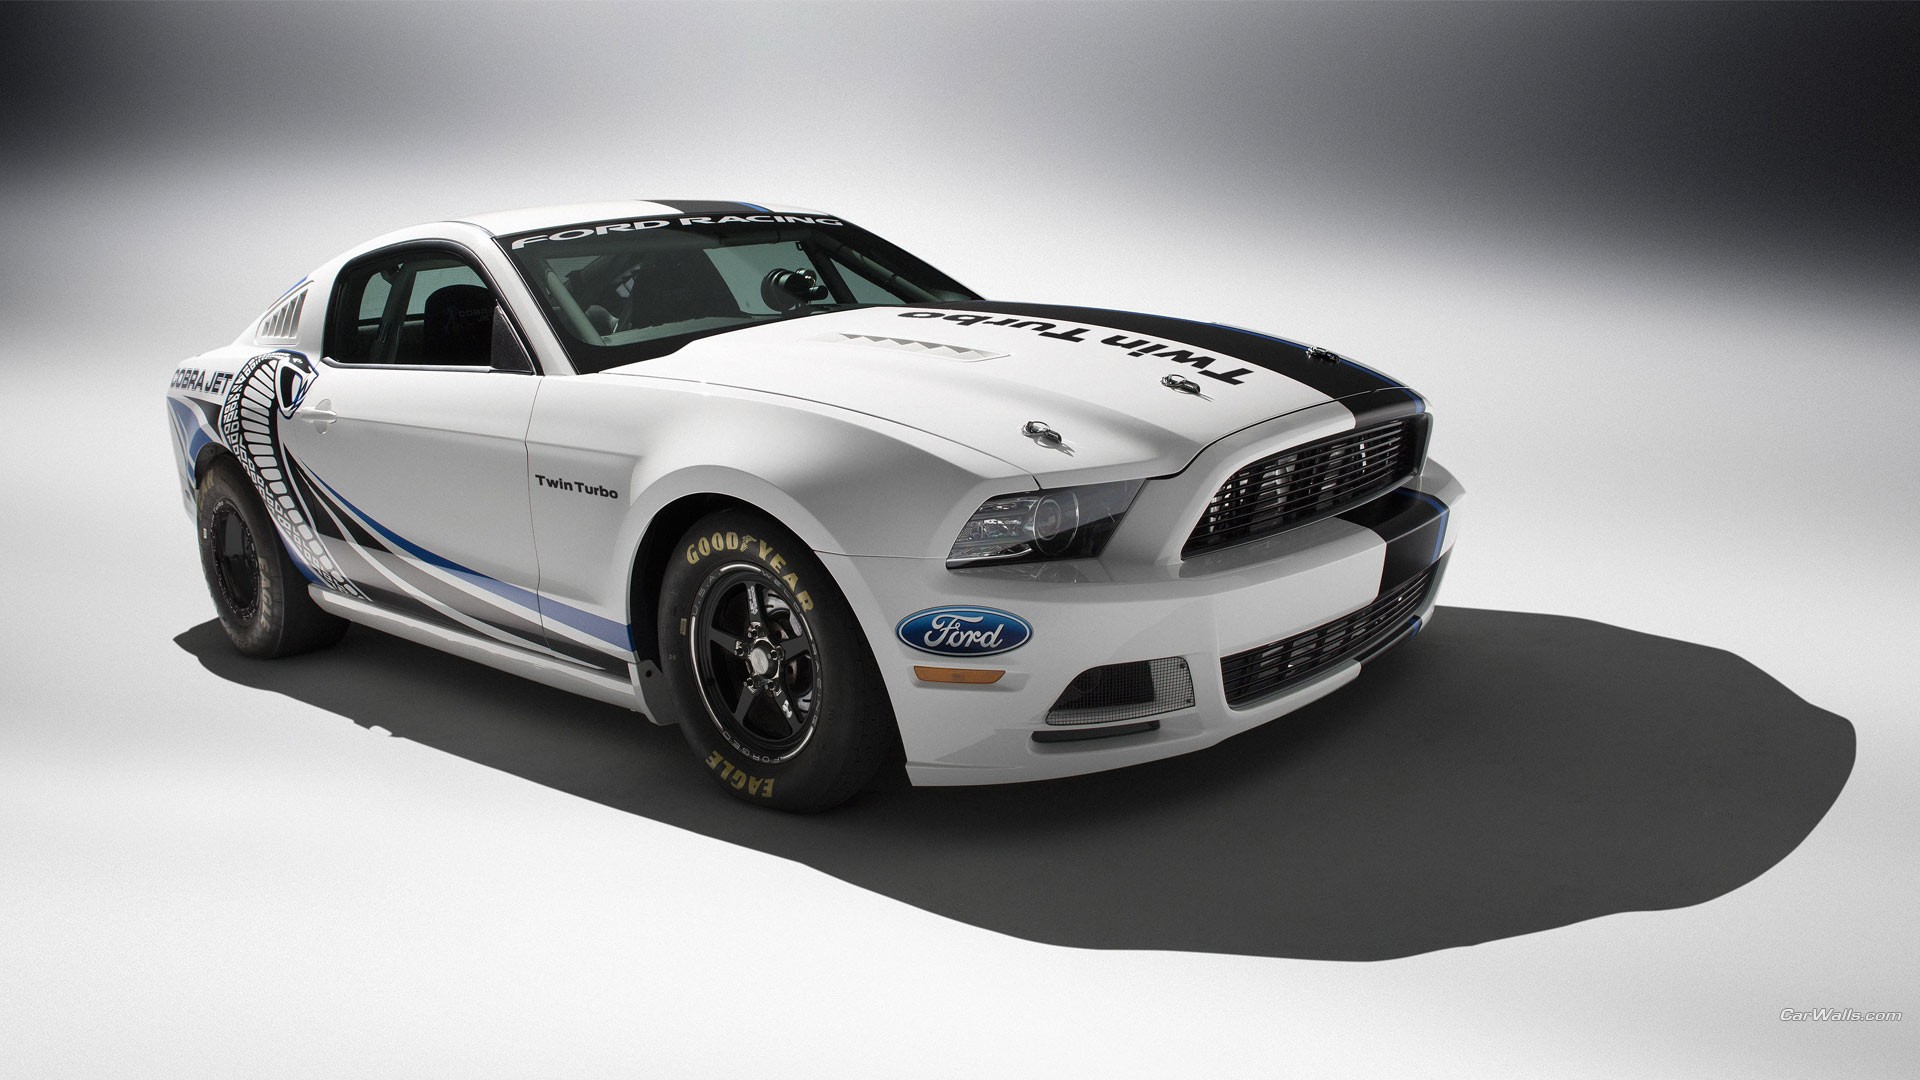 General 1920x1080 car Ford vehicle white cars Ford Mustang muscle cars American cars